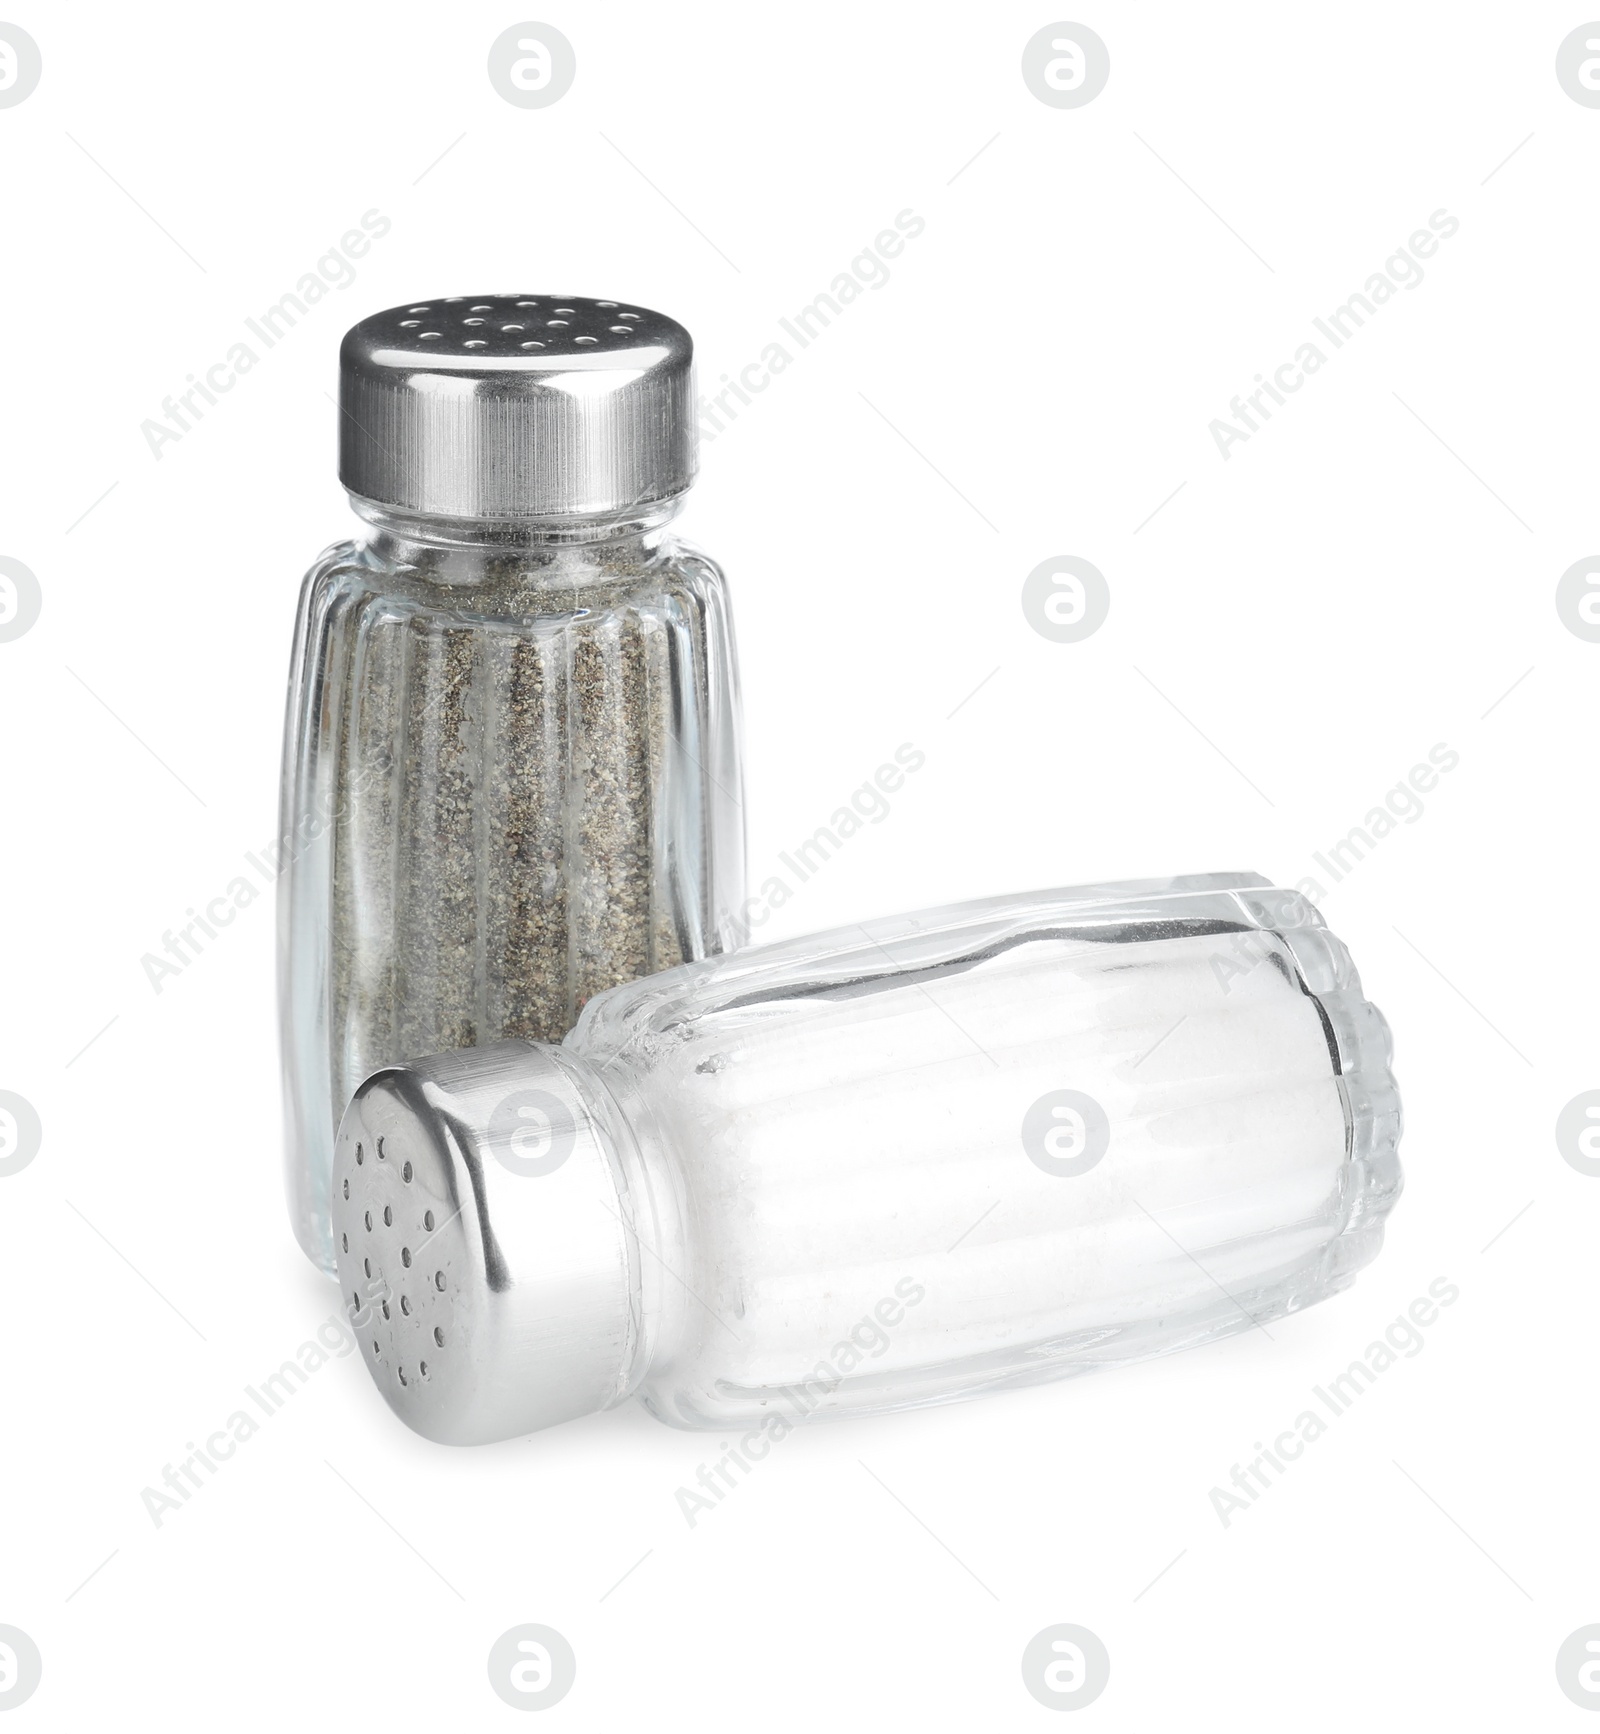 Photo of Salt and pepper shakers on white background